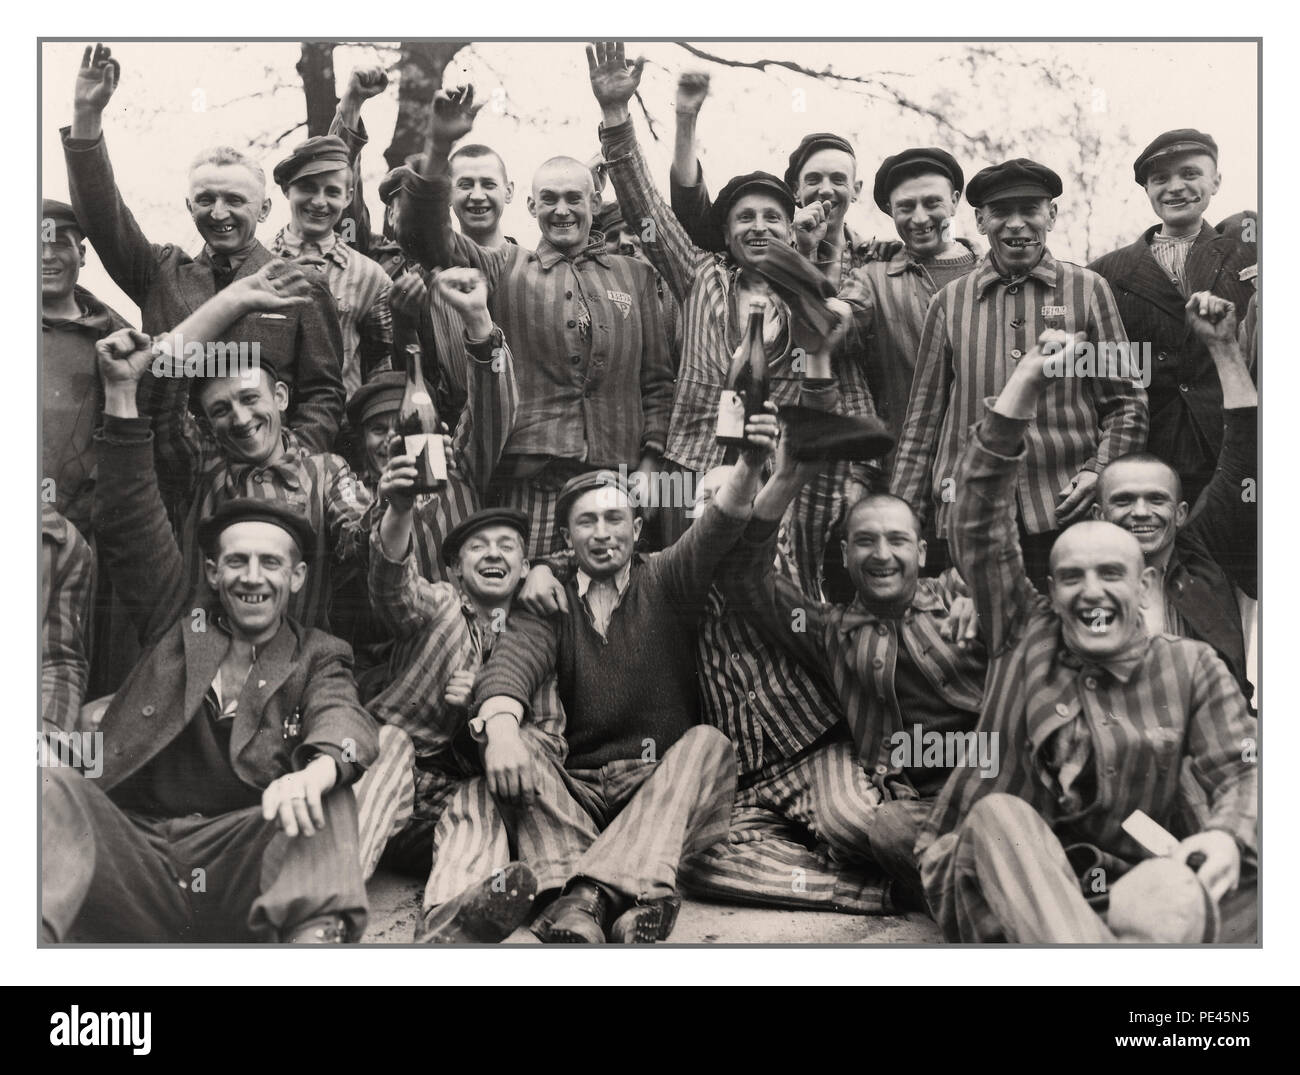 DACHAU LIBERATION Polish prisoners in Dachau concentration camp, some in striped uniform celebrating their liberation when Allied soldiers liberated the camp April 29, 1945, Dachau was surrendered to Brig. Gen. Henning Linden of the 42nd Infantry Division U.S. Army by Untersturmführer Wicker. during World War II Gen. of the Army Dwight D. Eisenhower issued a communiqué regarding the capture of Dachau concentration camp: 'Our forces liberated & mopped up the infamous concentration camp at Dachau. Approximately 32,000 prisoners were liberated; 300 SS camp guards were quickly neutralized. Stock Photo